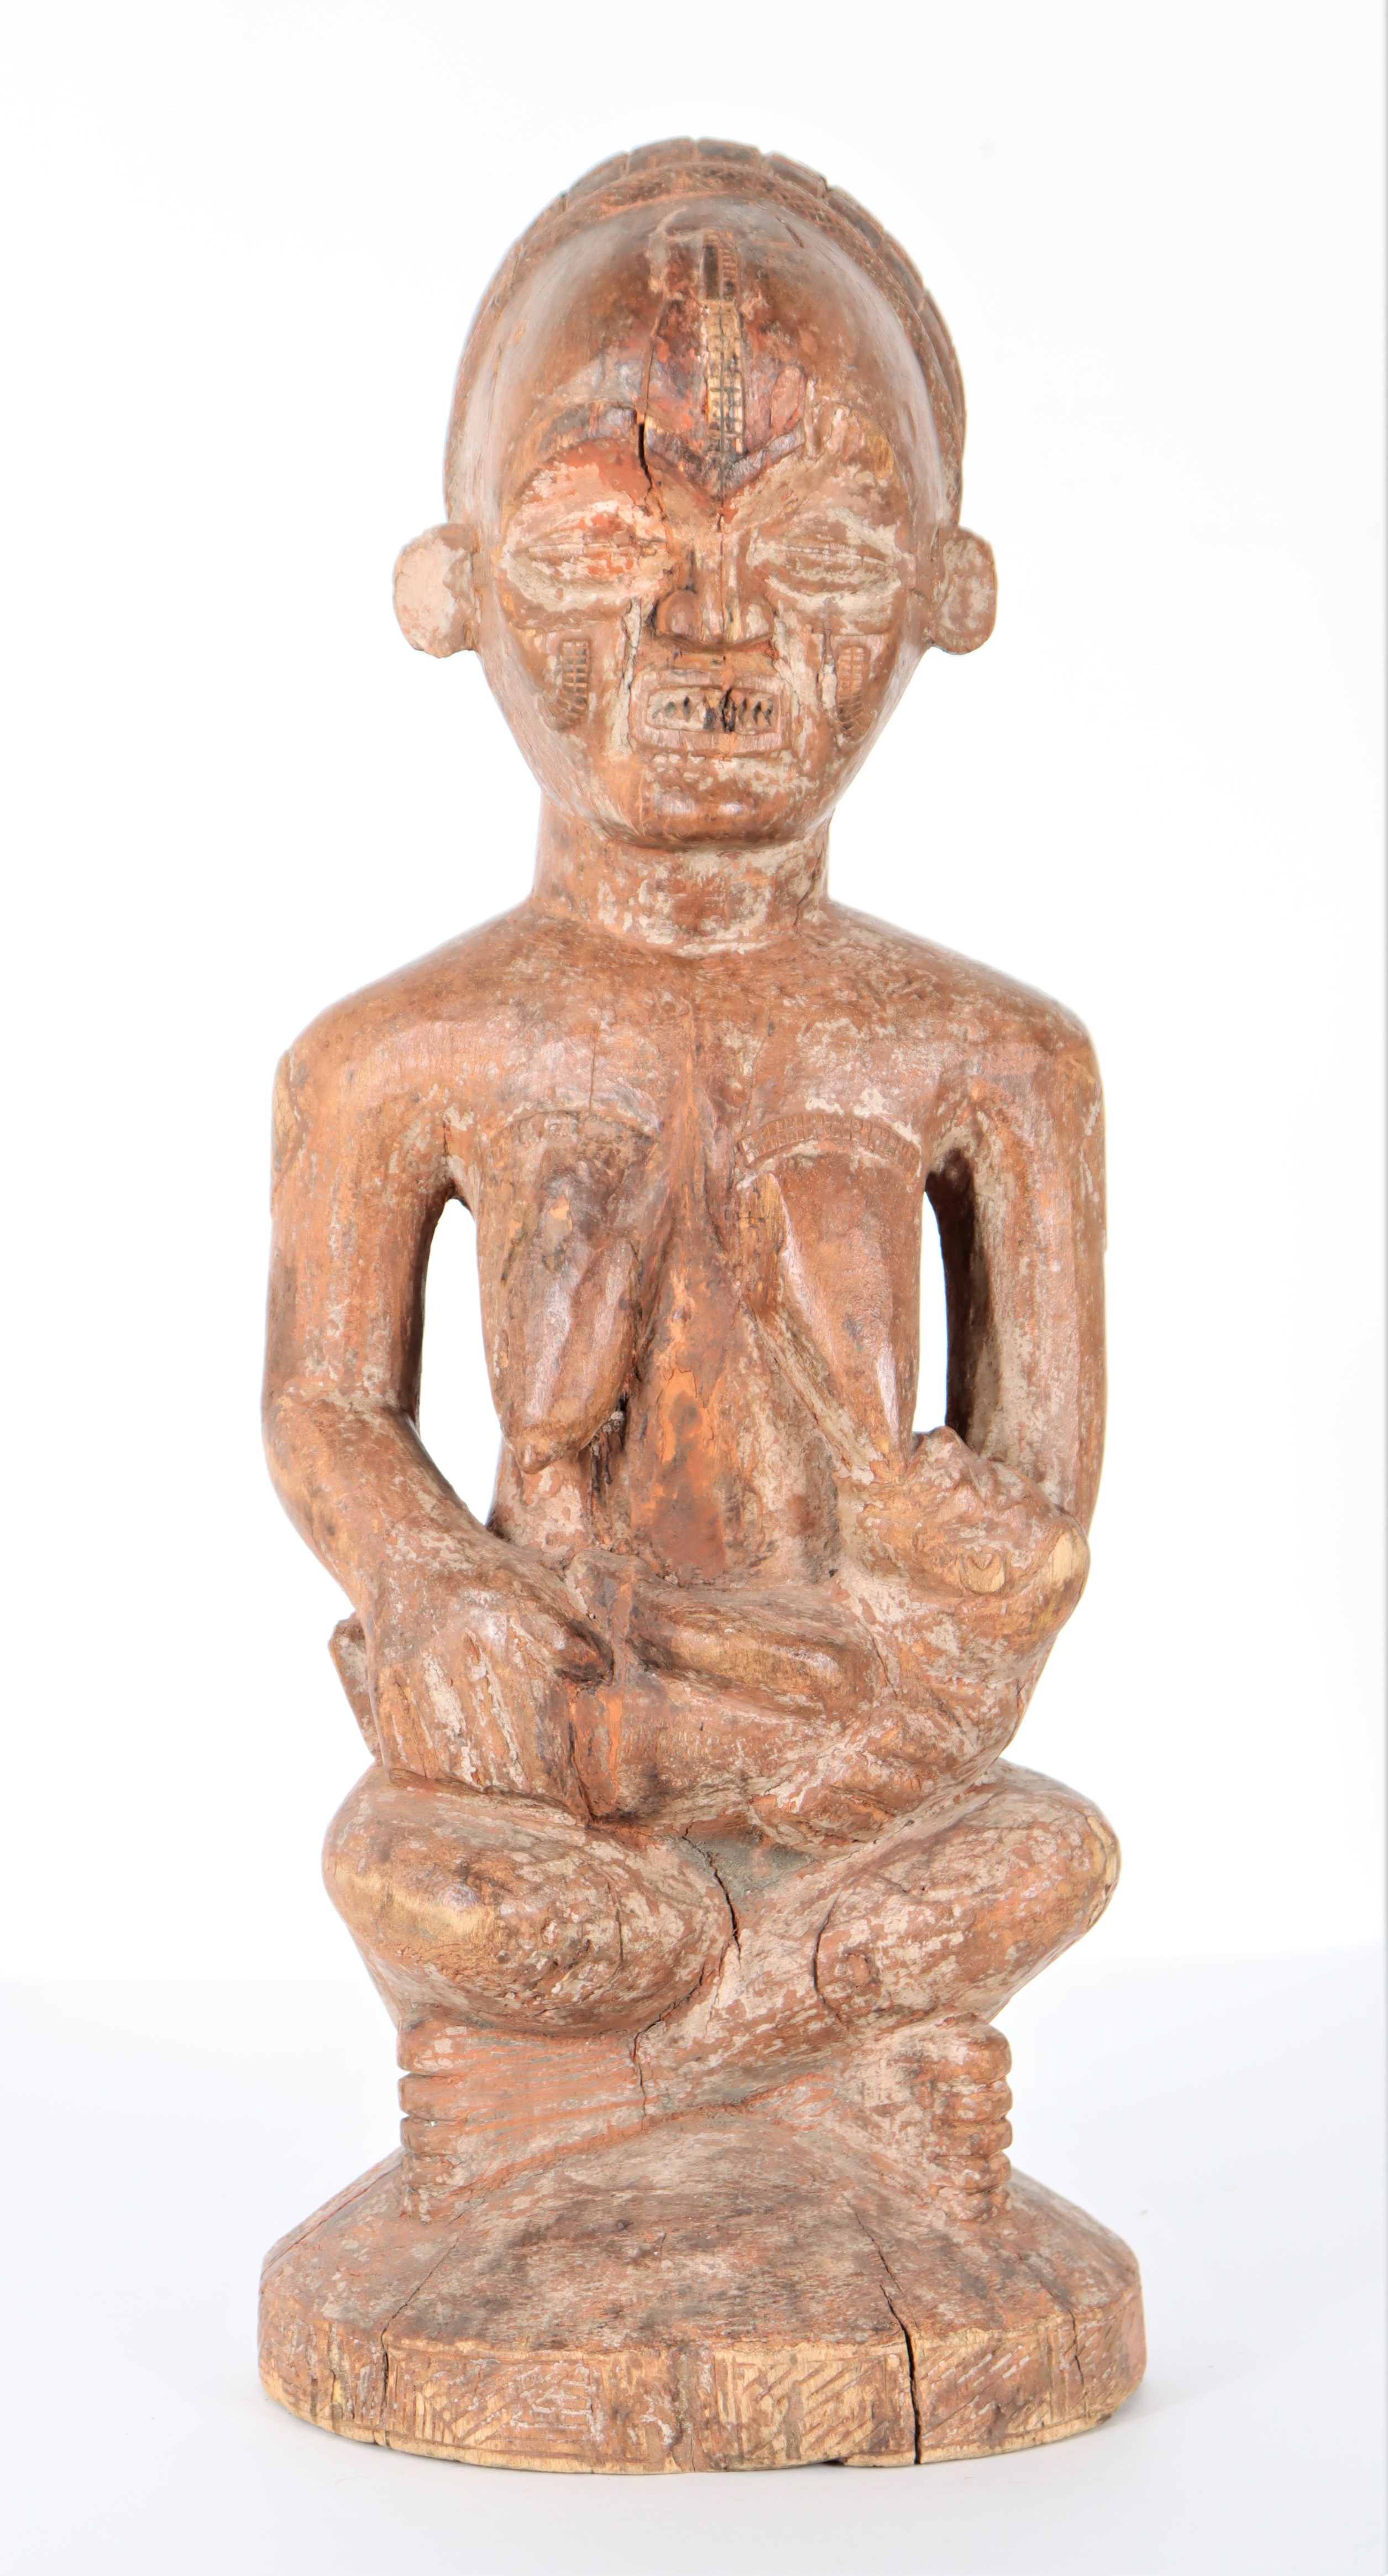 African Hand Carved Wooden Fertility Sculpture - Image 17 of 18